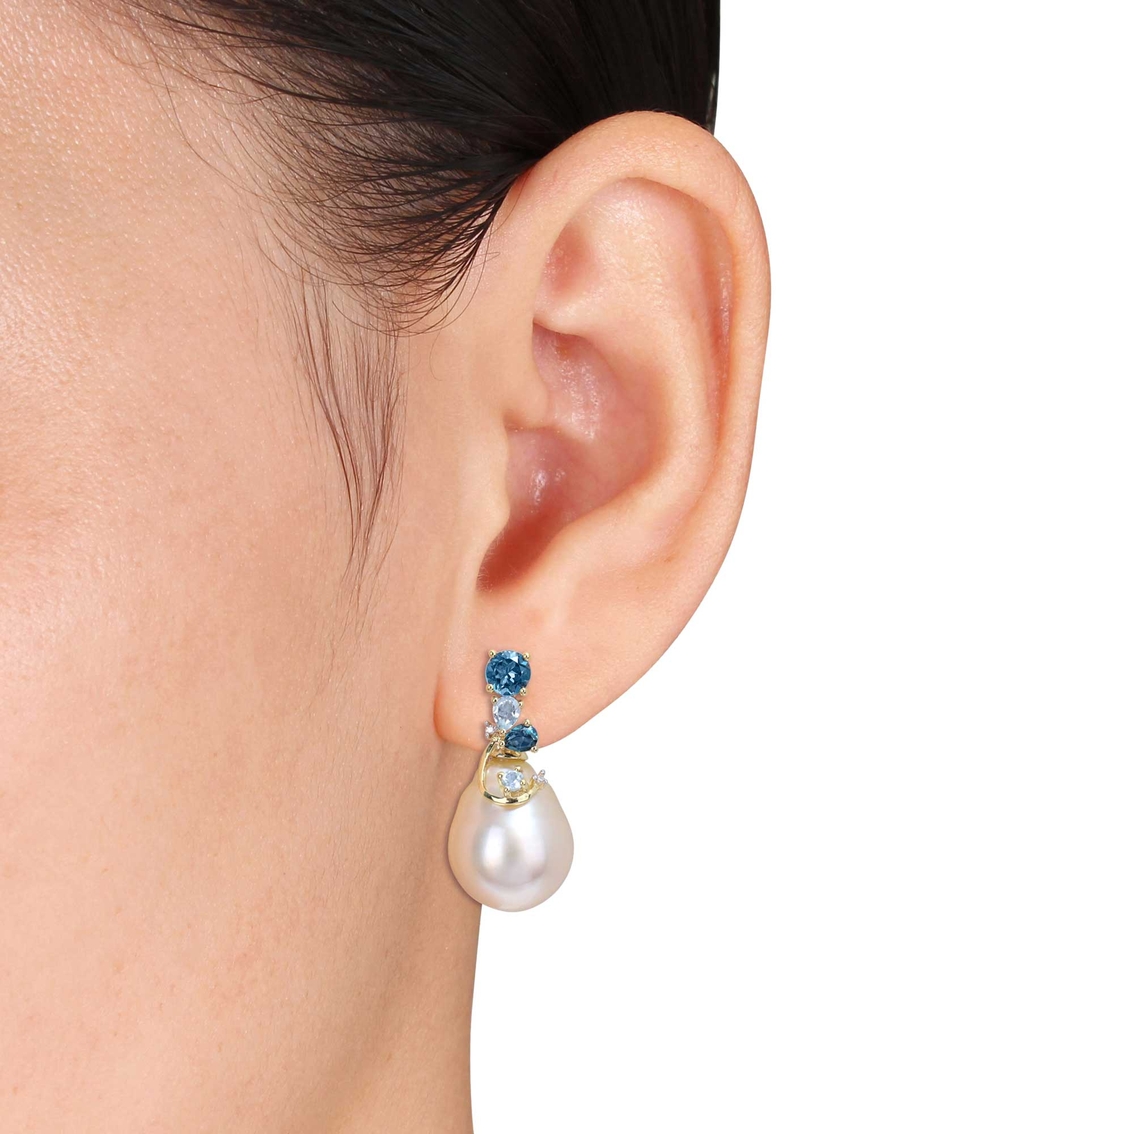 Sofia B. 14K Gold Cultured South Sea Pearl Blue Topaz and Diamond Cluster Earrings - Image 2 of 2